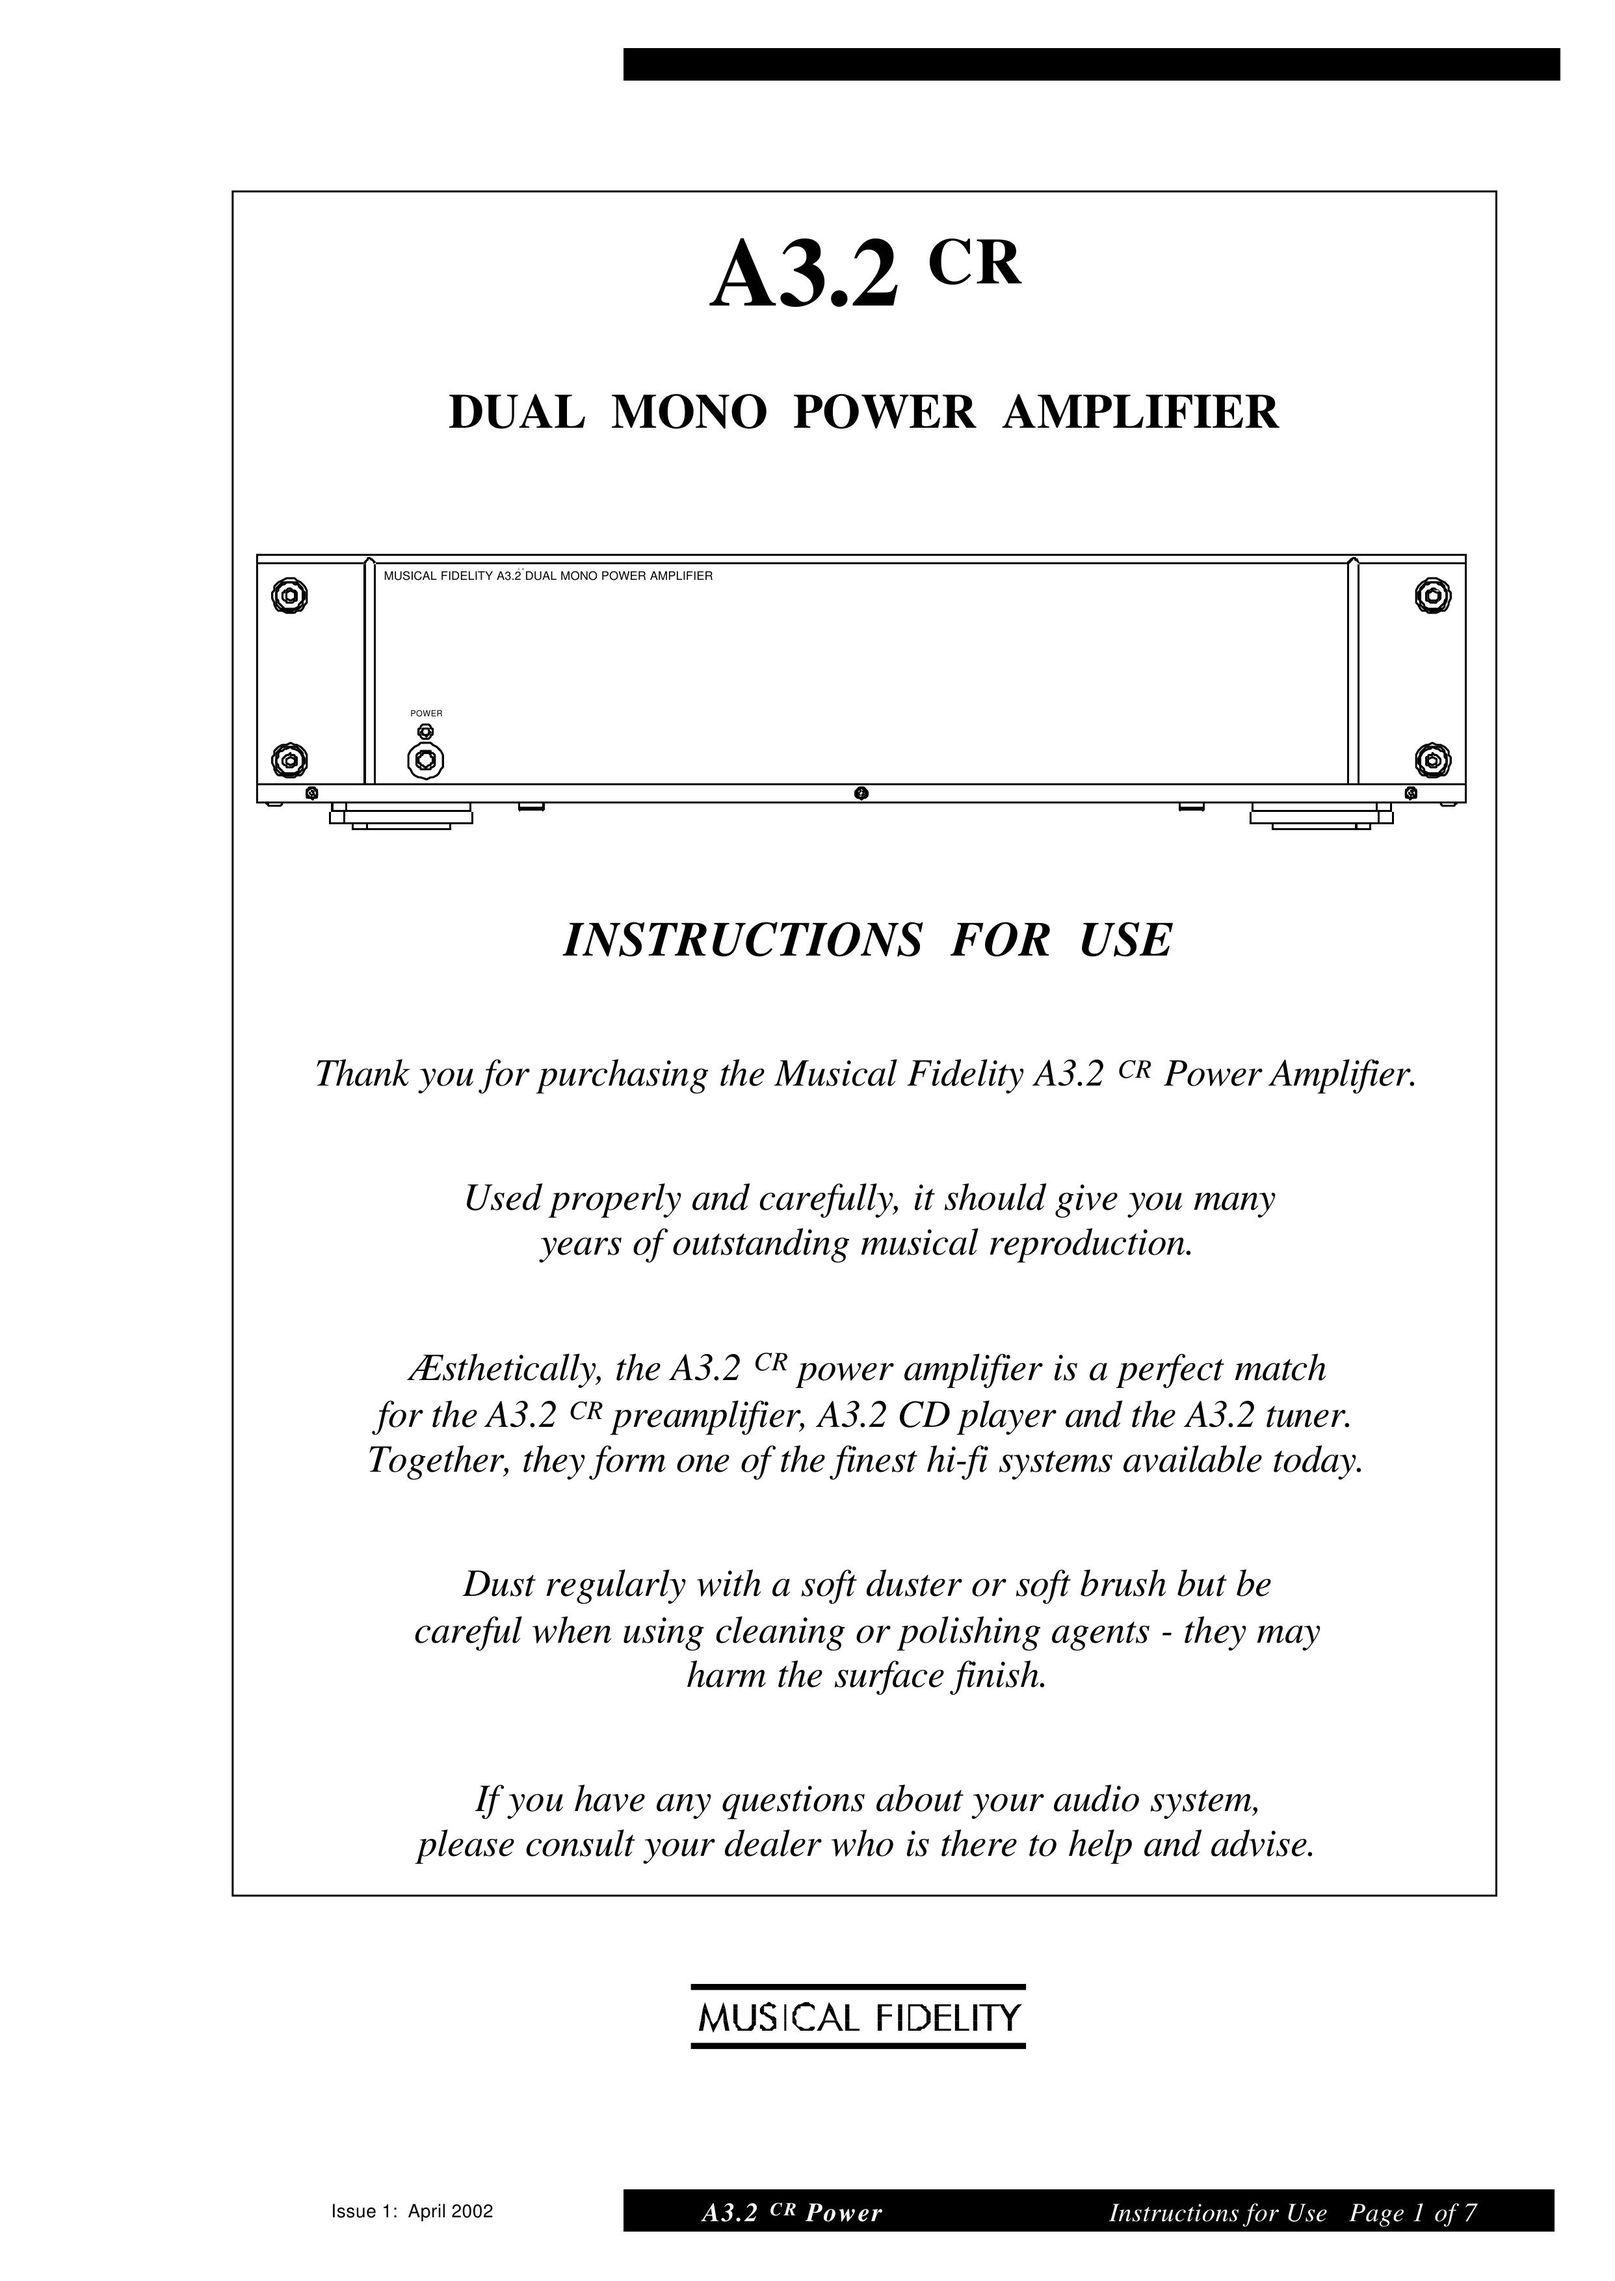 Musical Fidelity A3.2 CR Stereo Amplifier User Manual